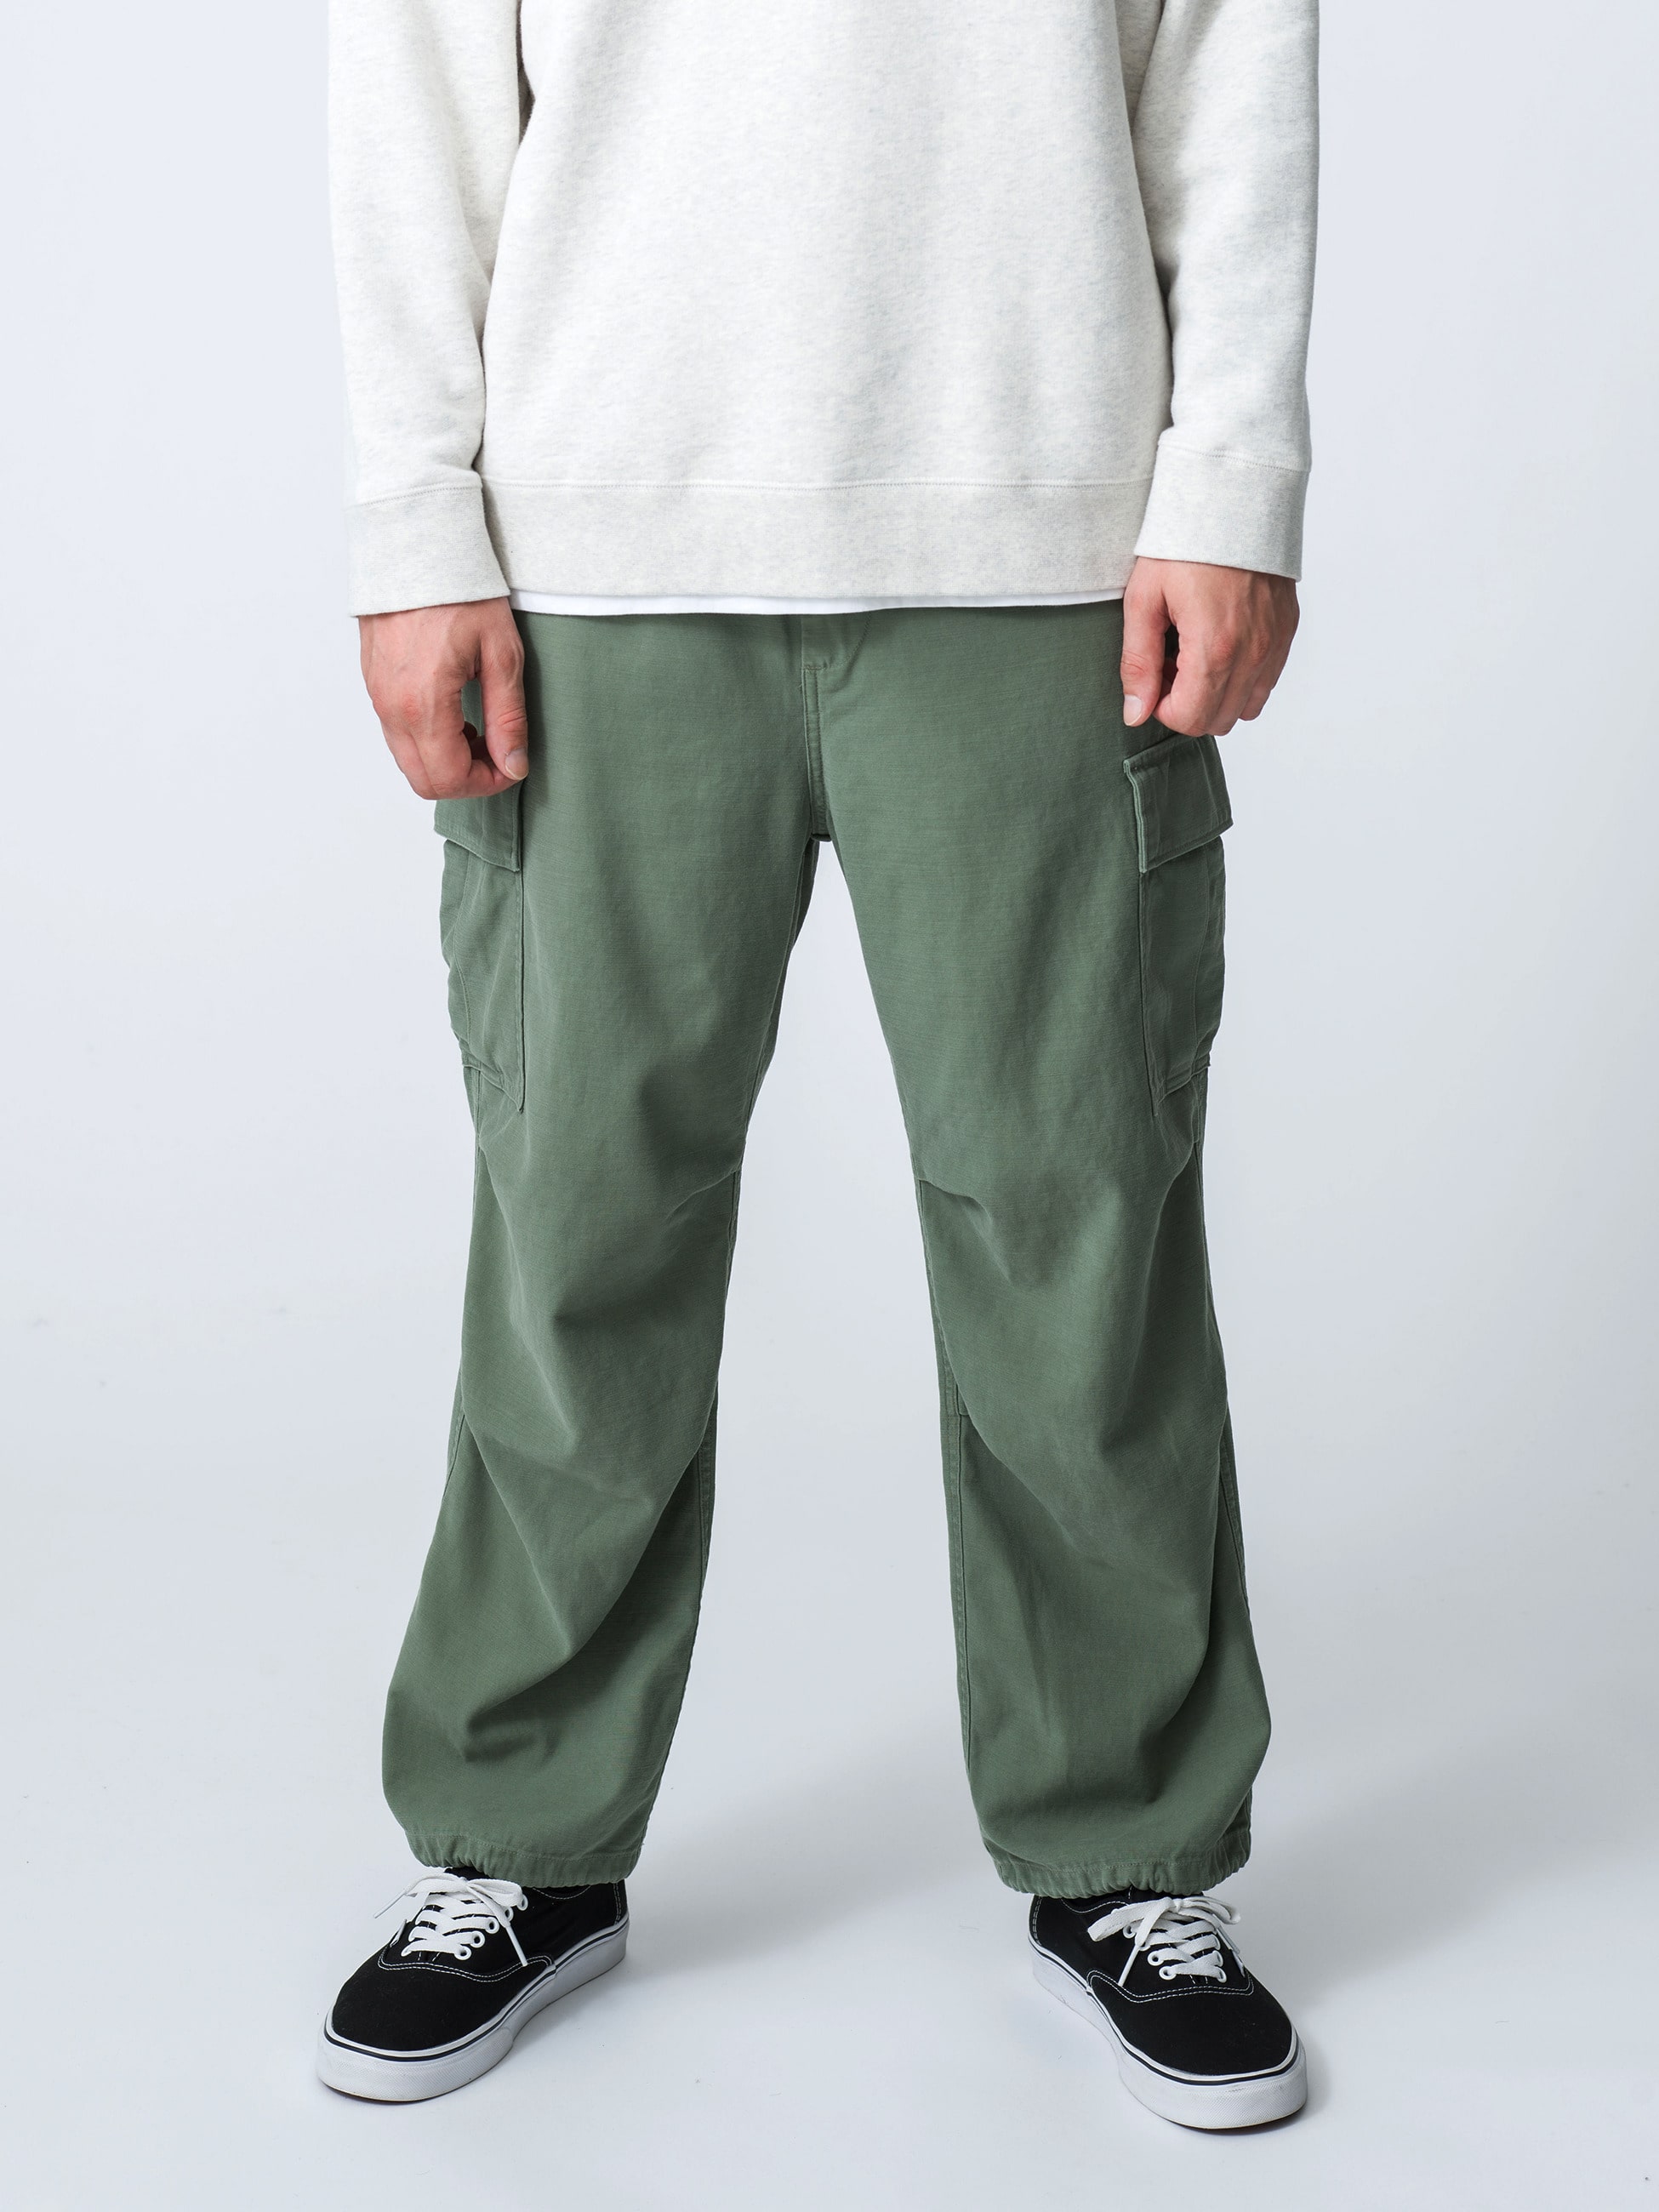 Type M-51 Over Pants